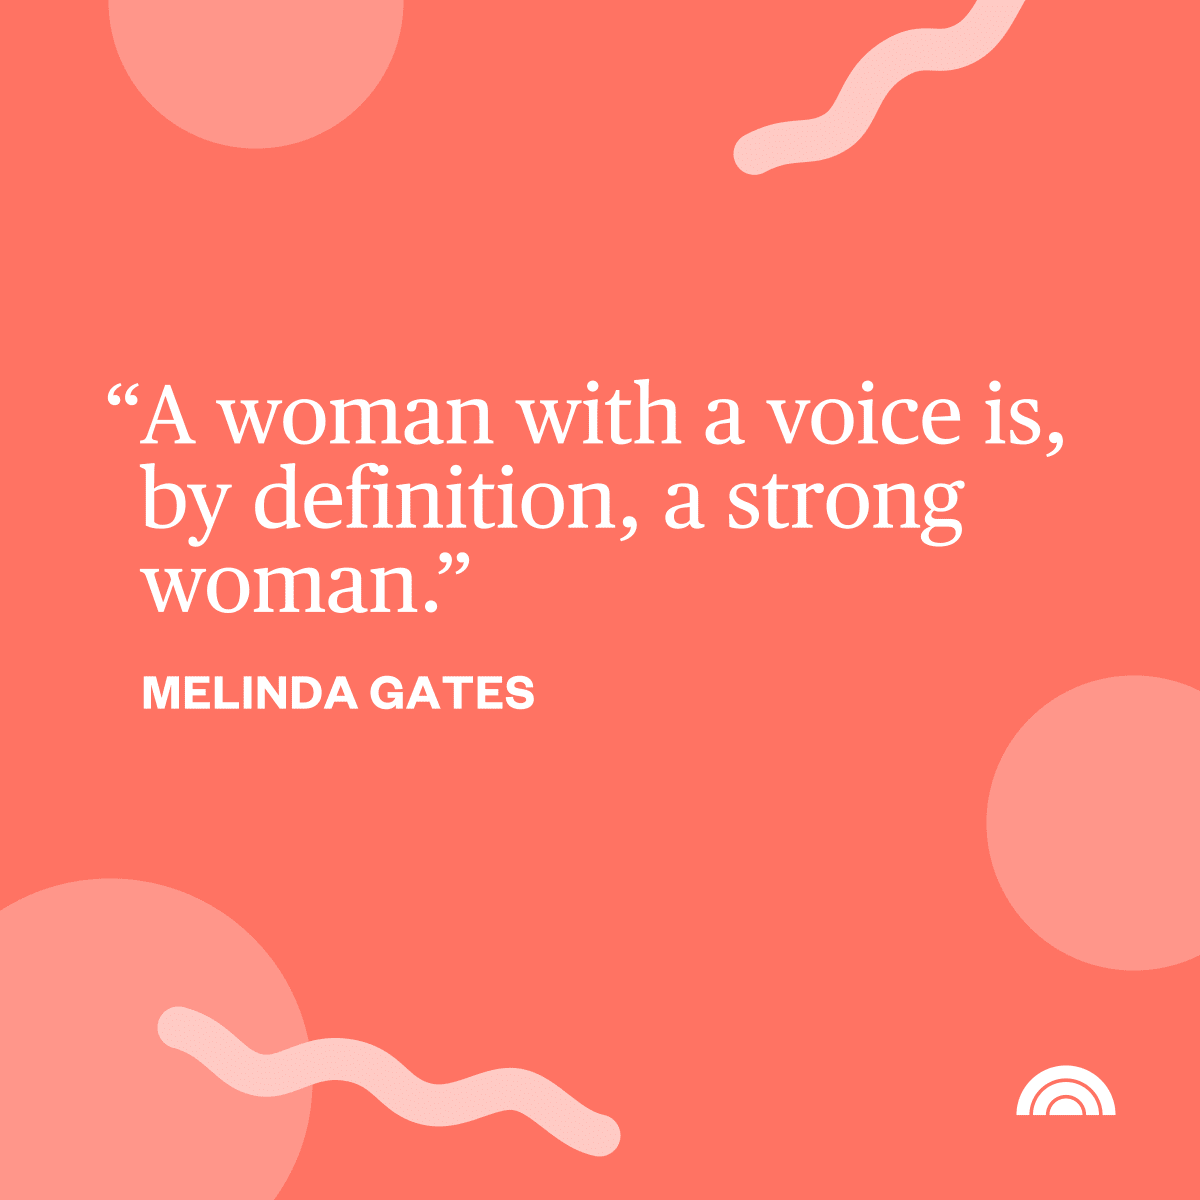 36 Women's History Month Quotes To Share With Kids